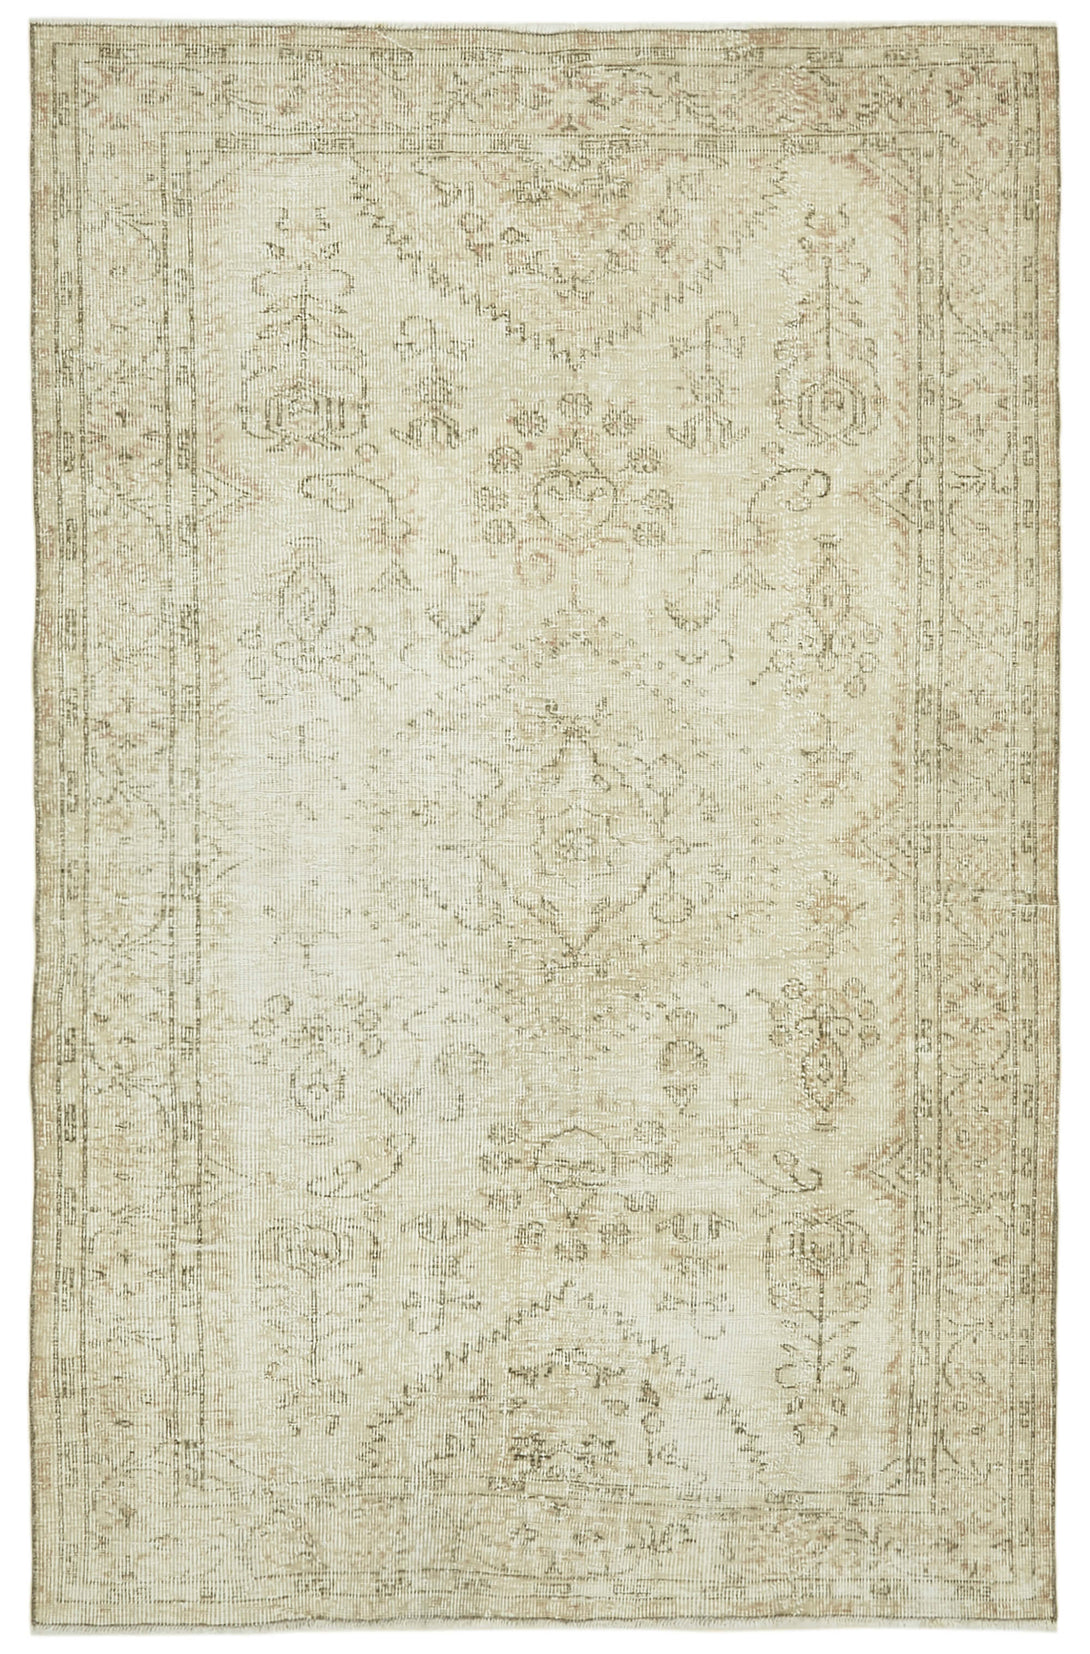 Handmade White Wash Area Rug > Design# OL-AC-41416 > Size: 5'-9" x 8'-10", Carpet Culture Rugs, Handmade Rugs, NYC Rugs, New Rugs, Shop Rugs, Rug Store, Outlet Rugs, SoHo Rugs, Rugs in USA